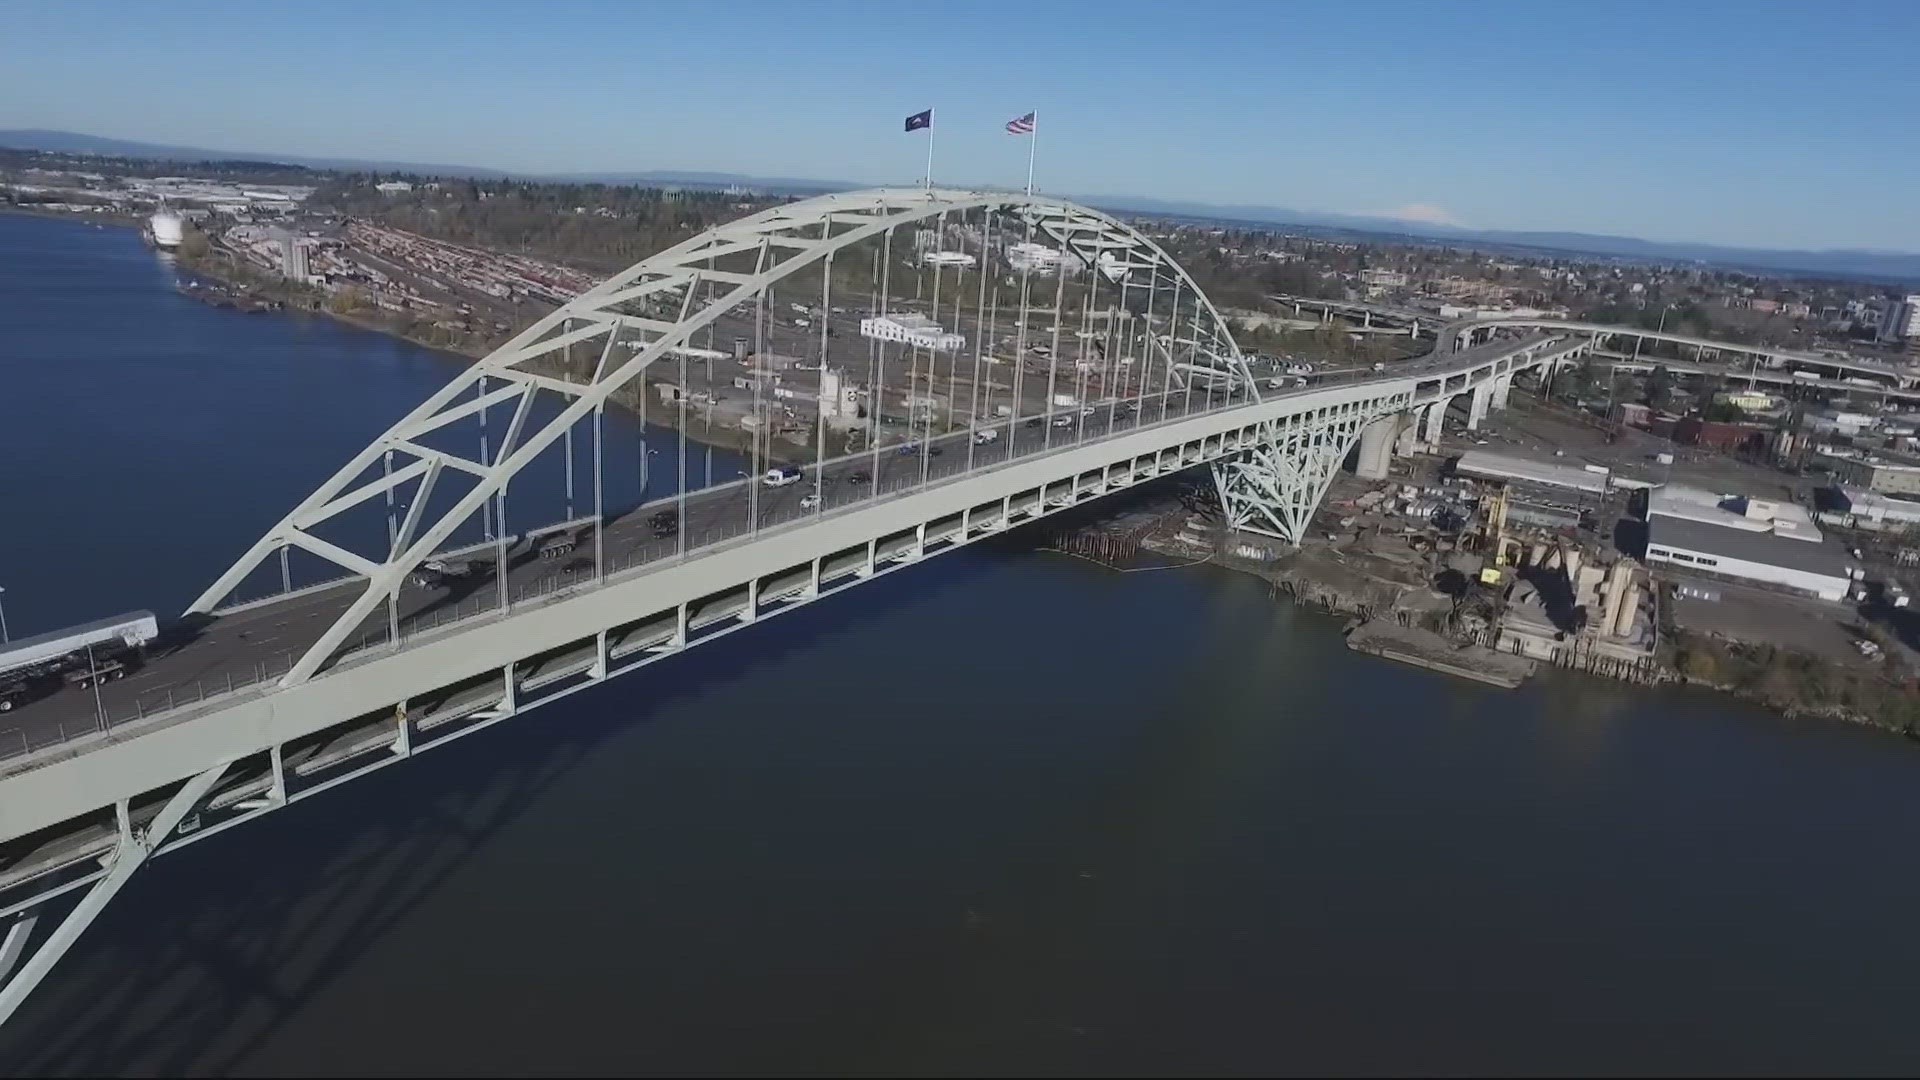 Devon Haskins shares some history about the Fremont Bridge, and how they change the flag poles that stand above it. The bridge first opened on November 15th, 1973.